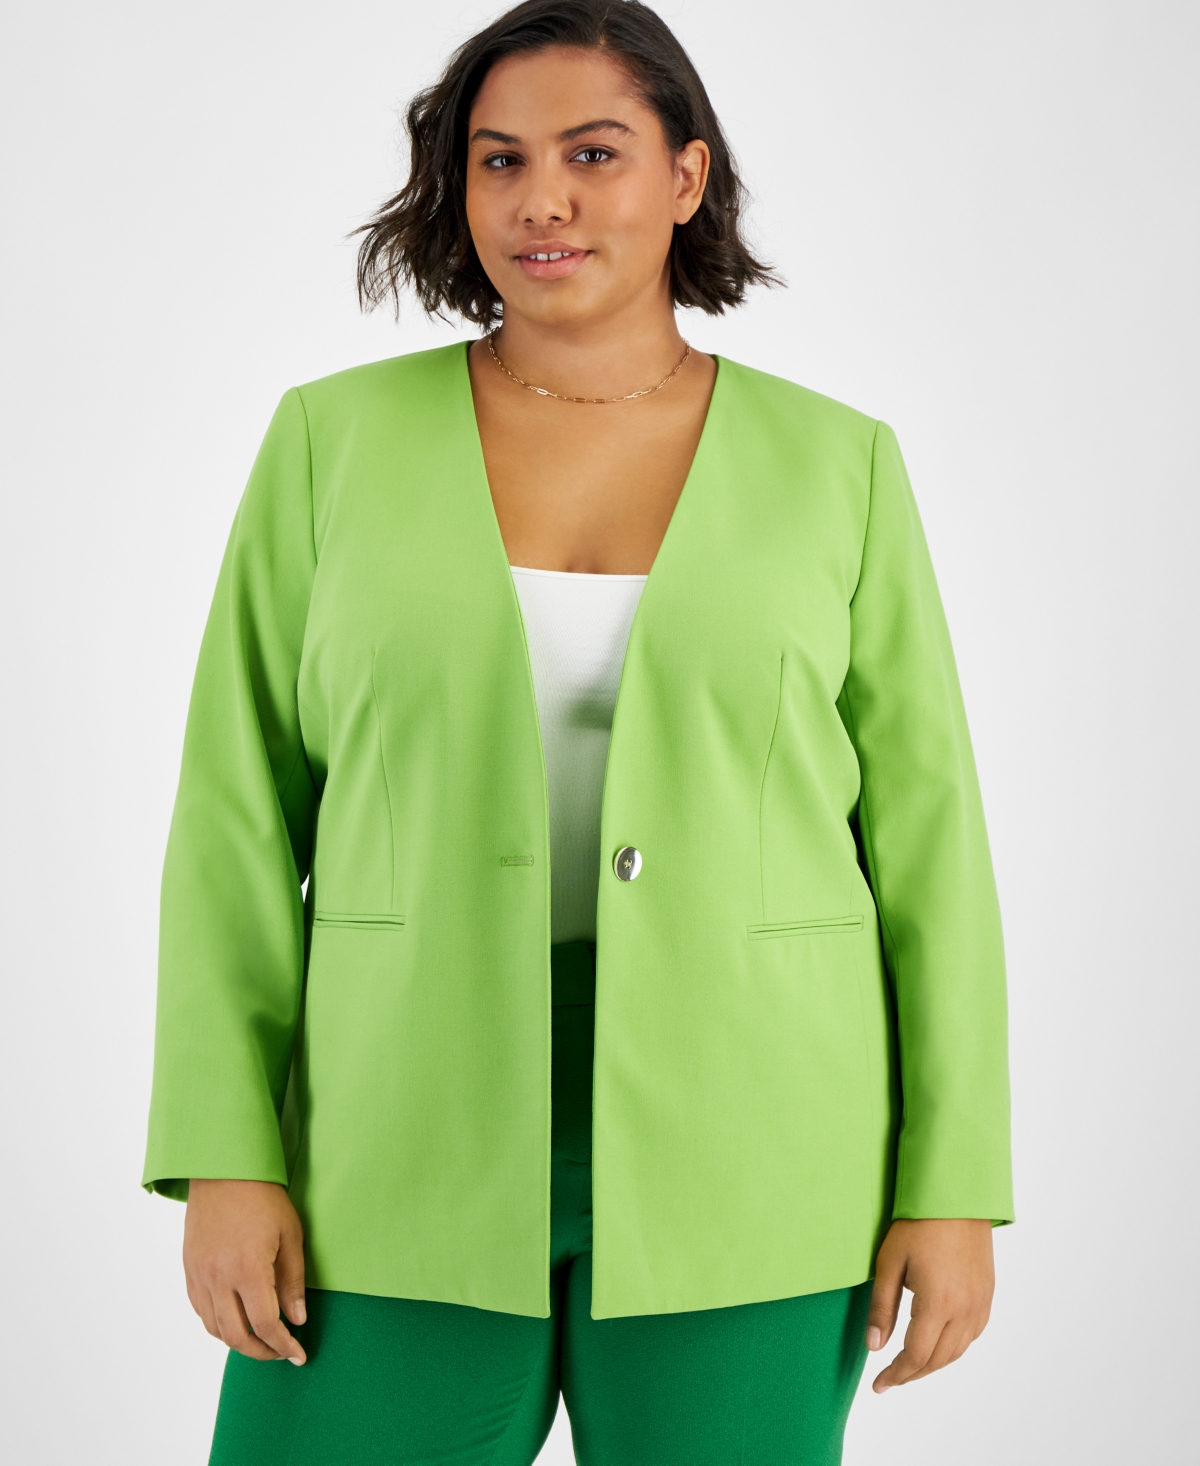 Plus Size Bi-Stretch Collarless One-Button Blazer, Created for Macy's - Green Apple